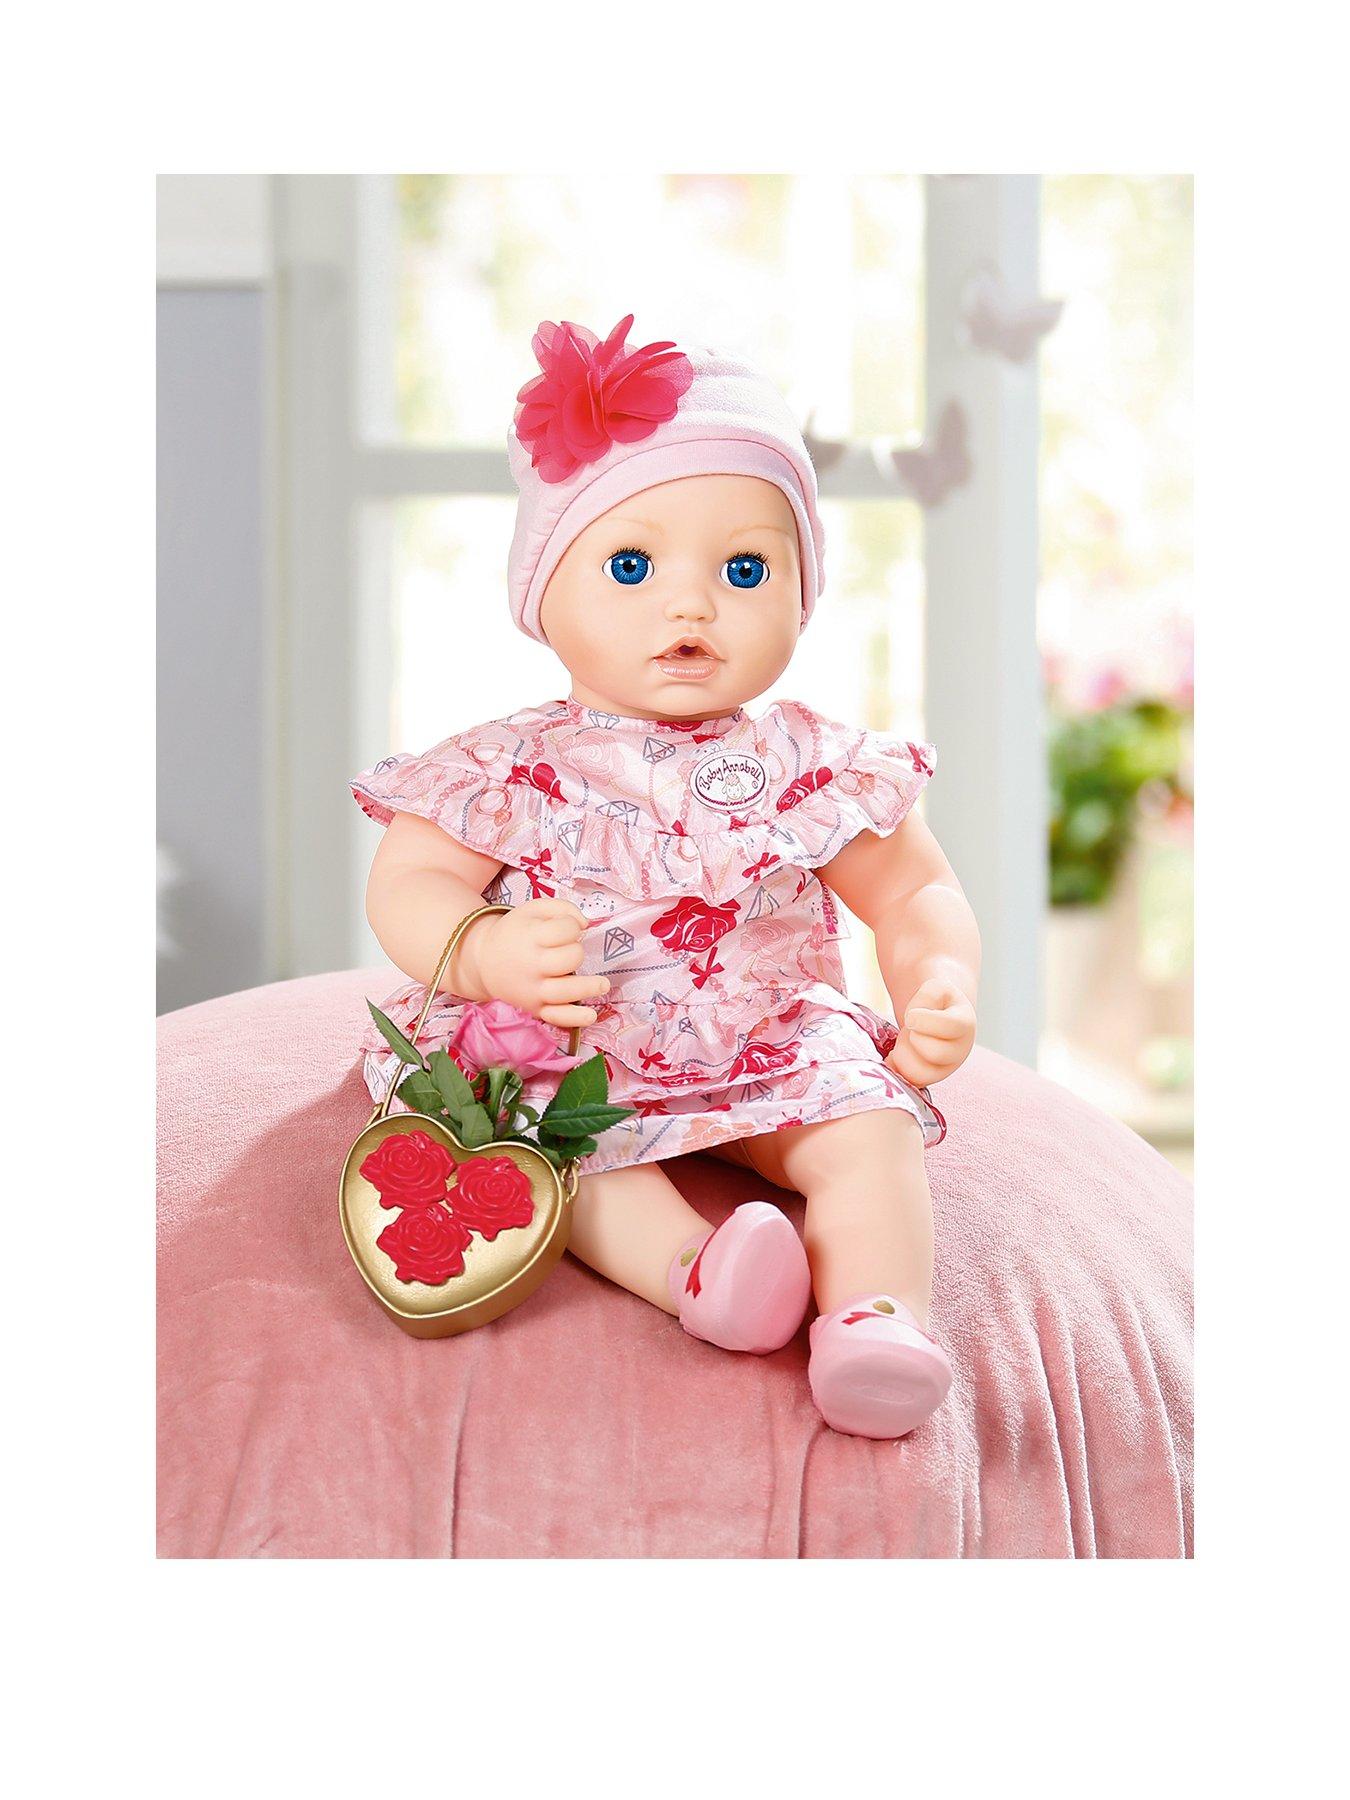 baby annabell clothes